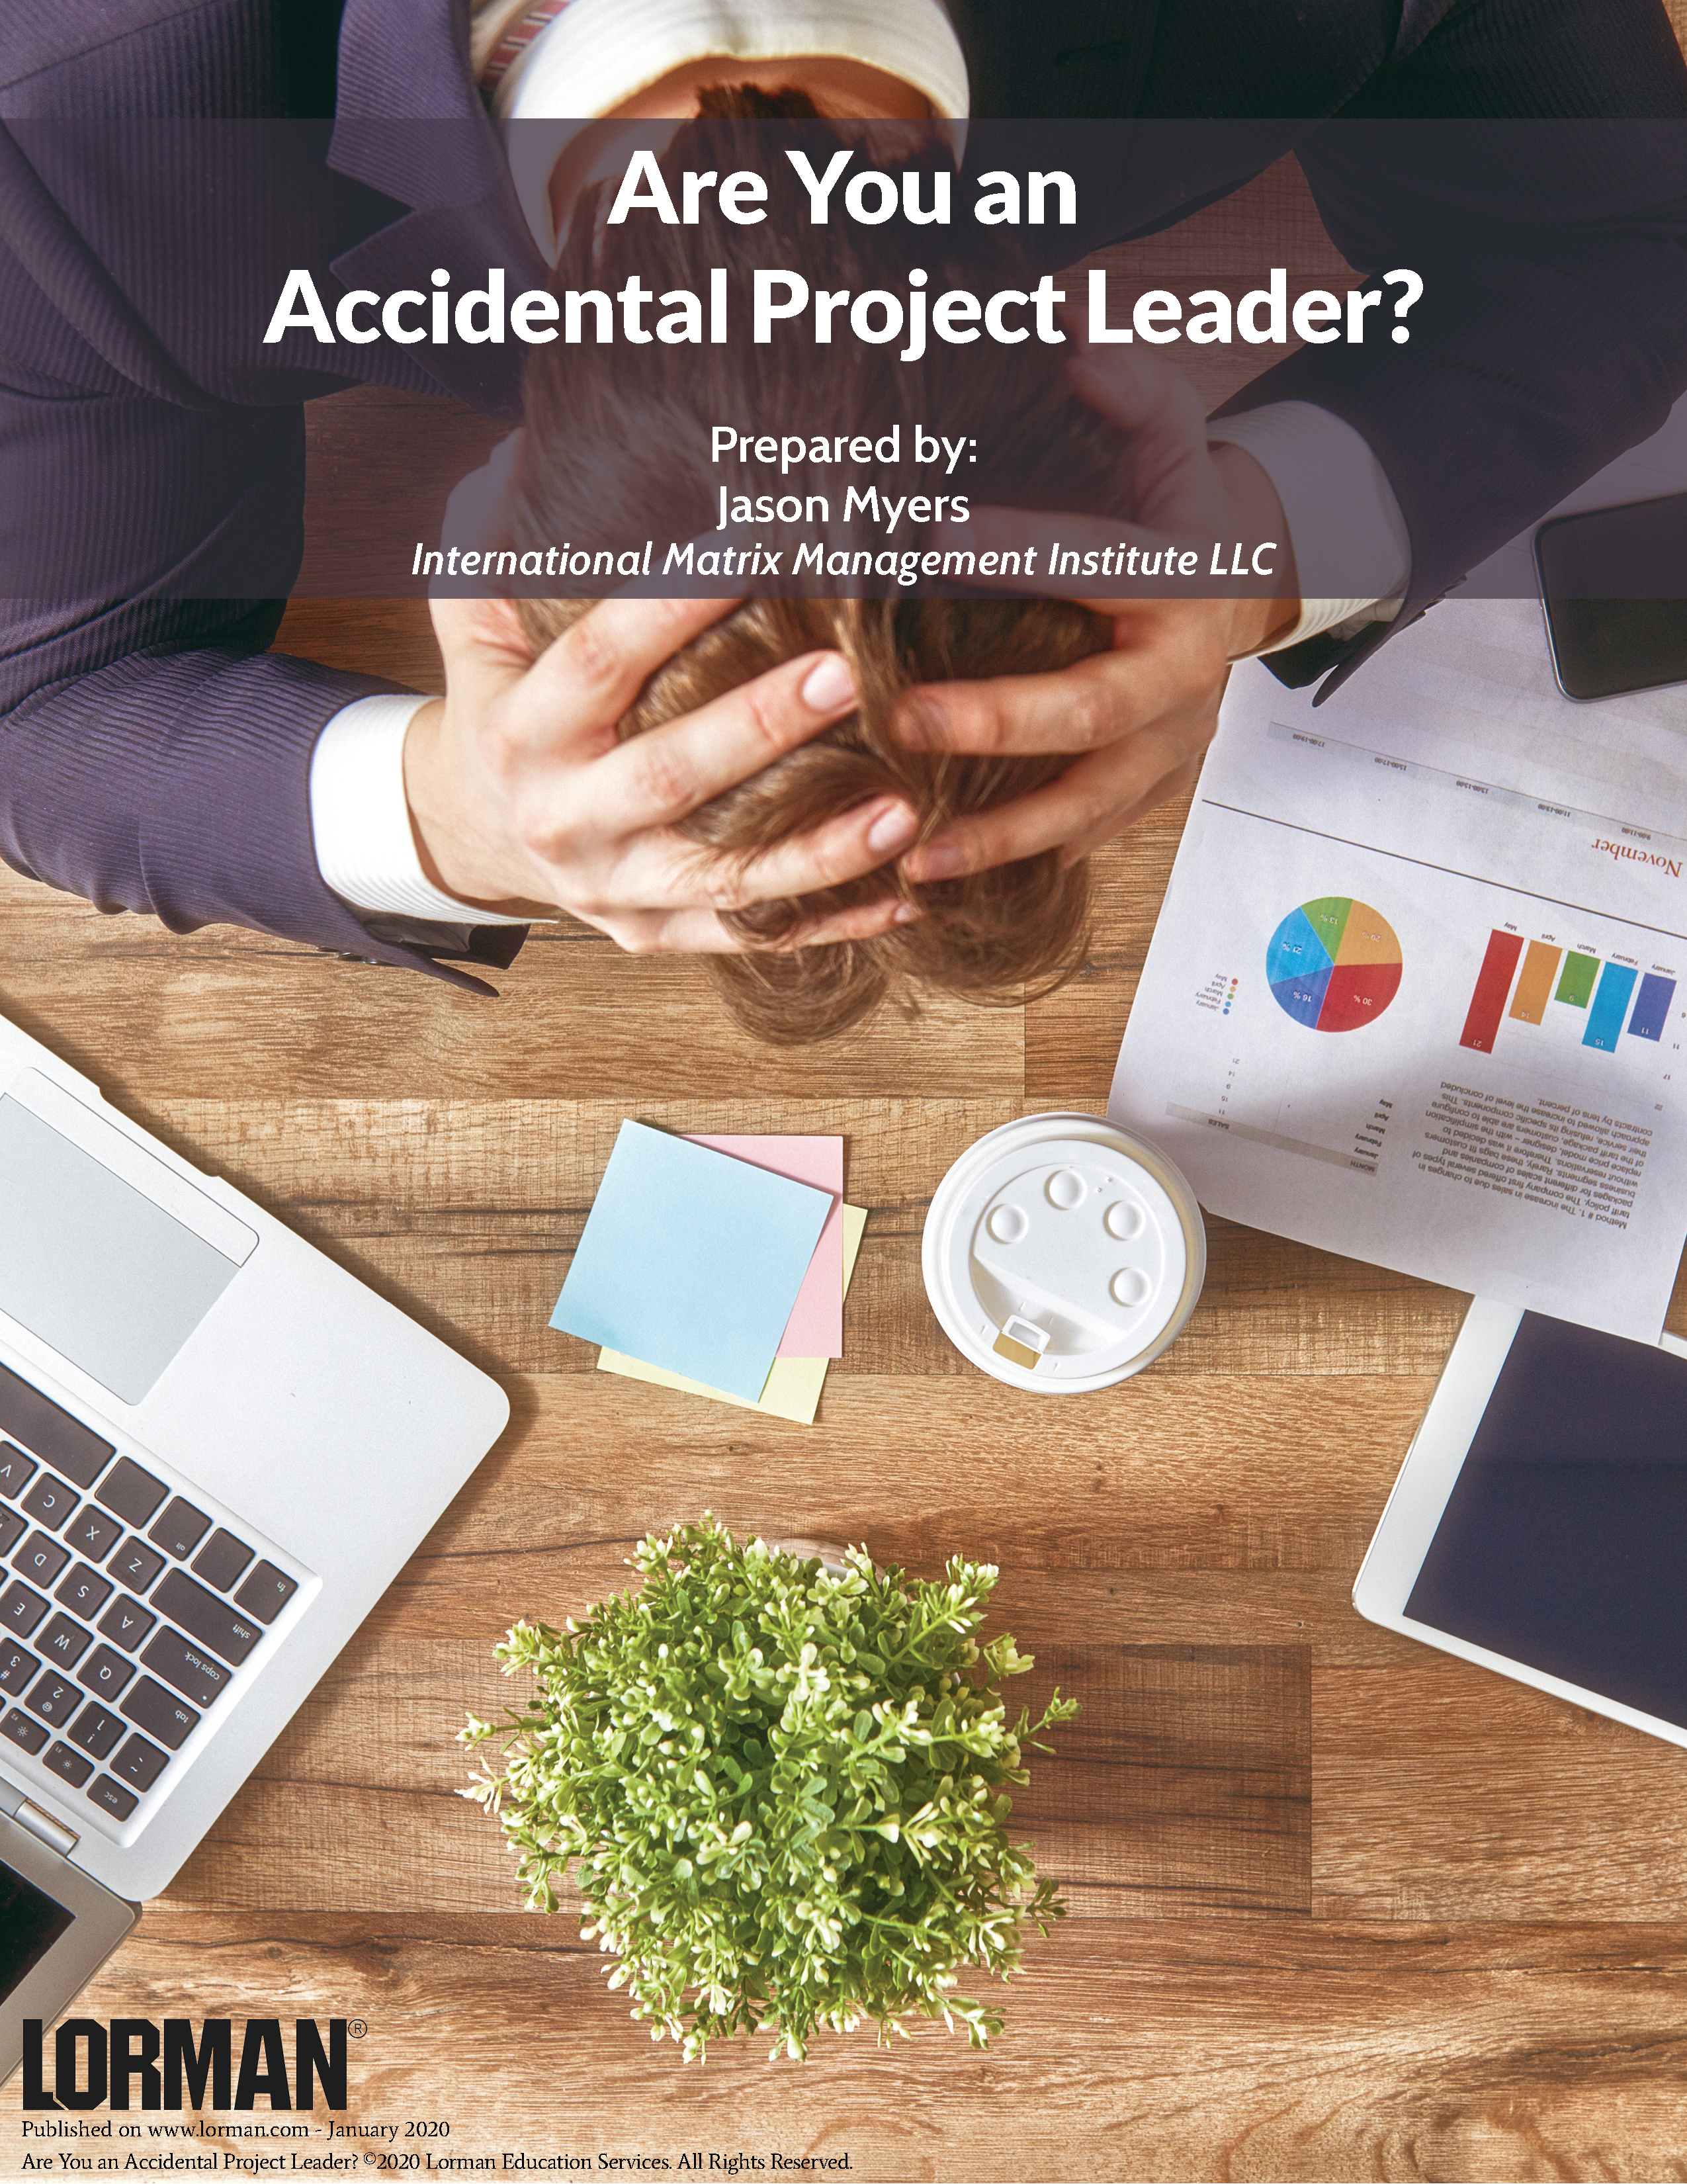 Are You an Accidental Project Leader?